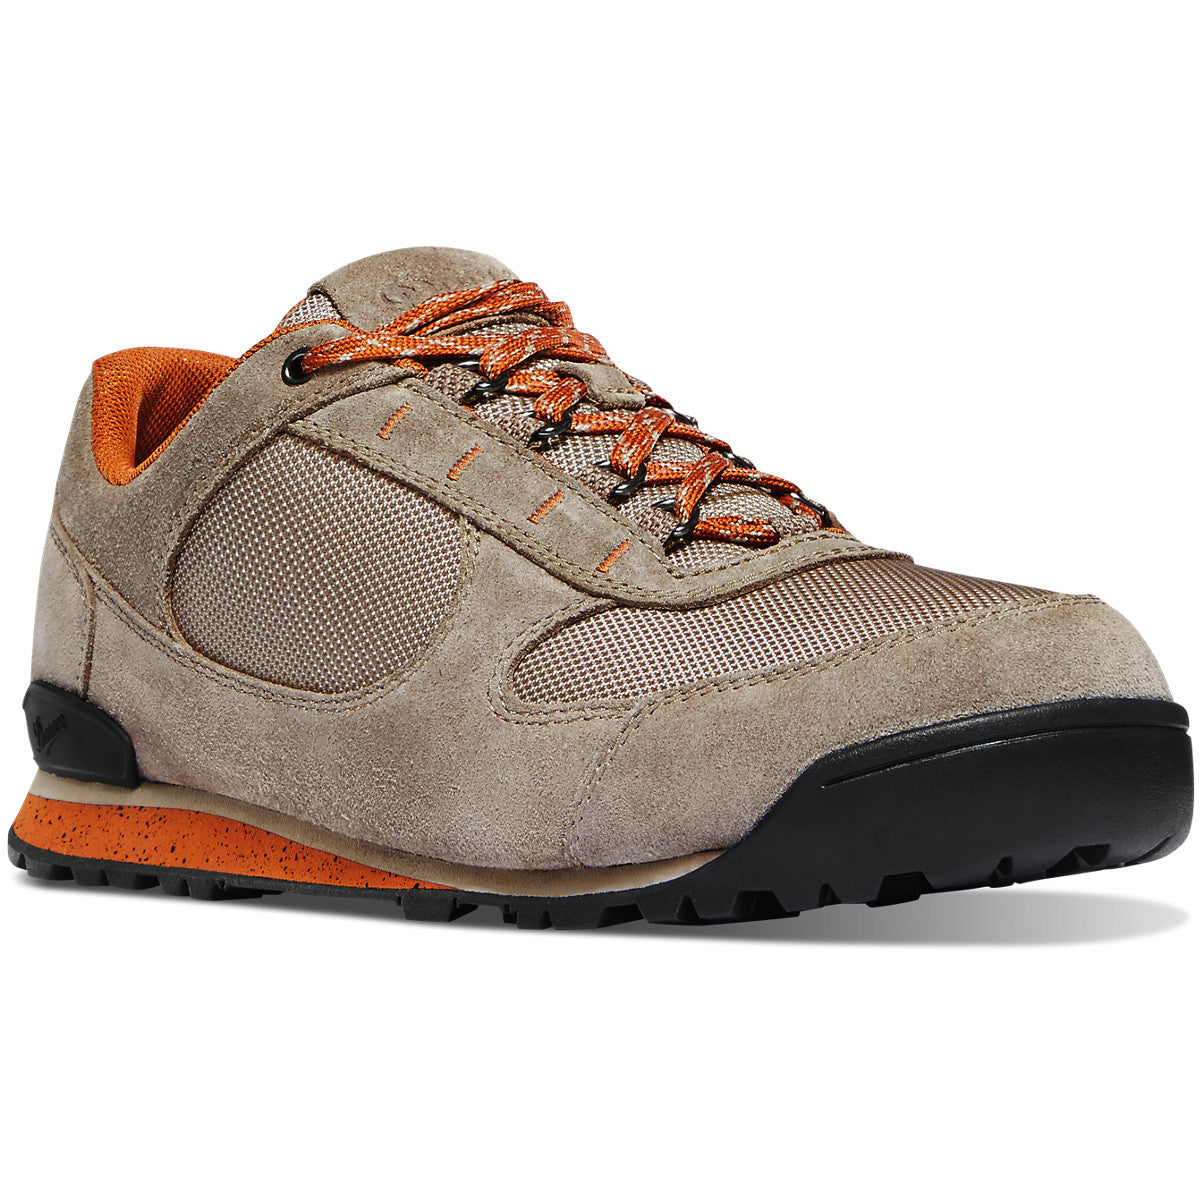 Danner Men's Jag Low 3" Hiking Shoe in Timber Wolf/Glazed Ginger from the side